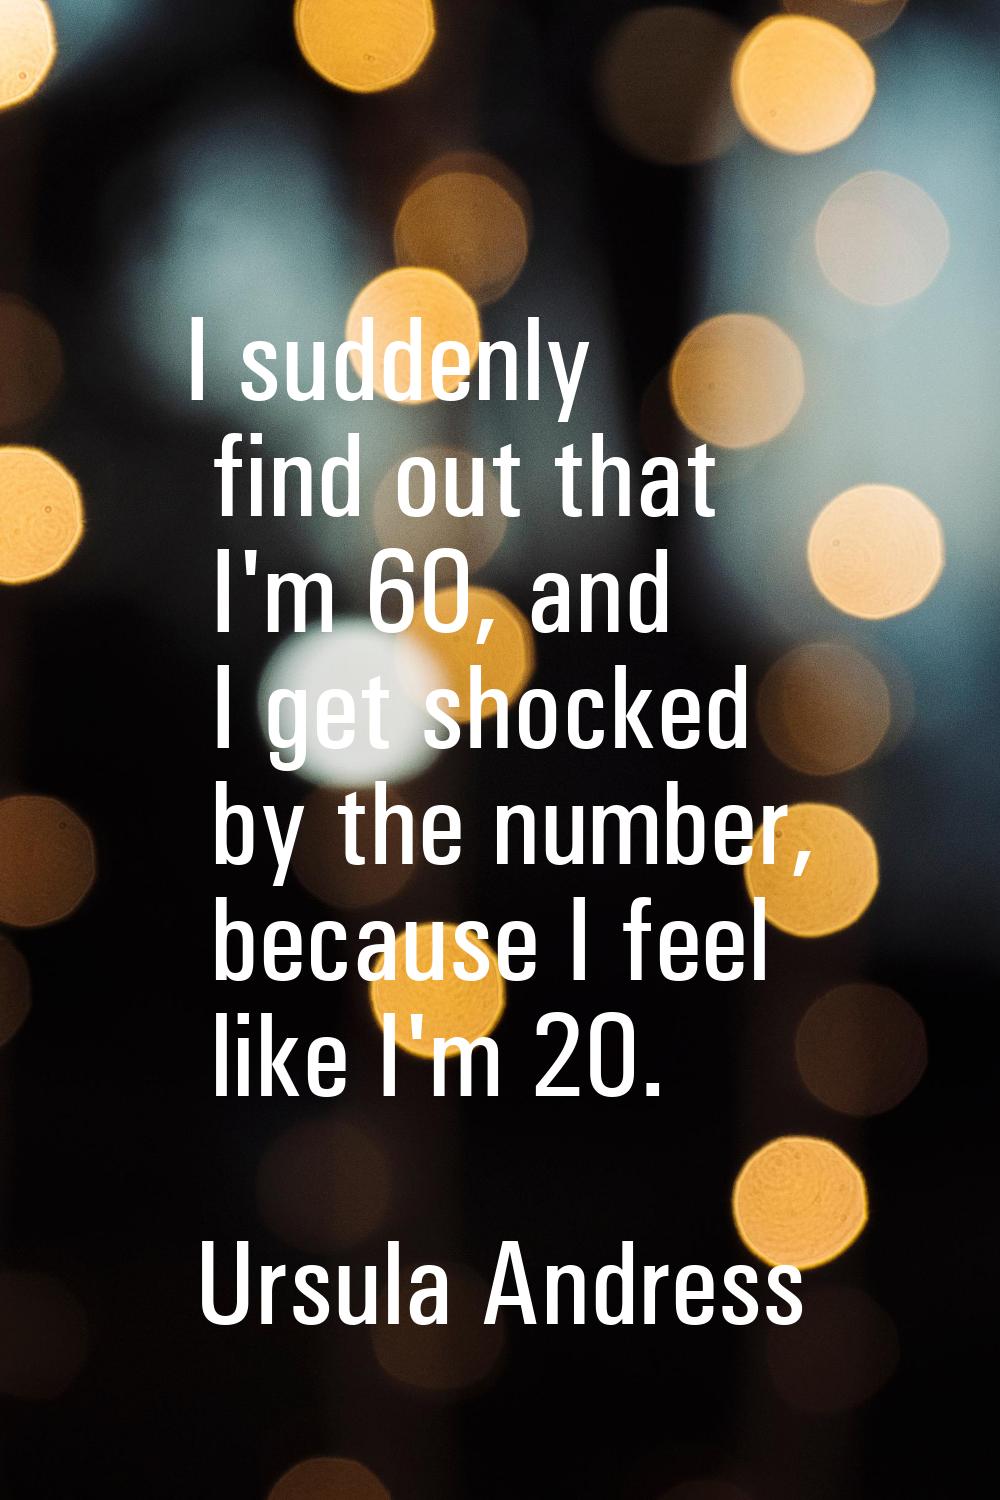 I suddenly find out that I'm 60, and I get shocked by the number, because I feel like I'm 20.